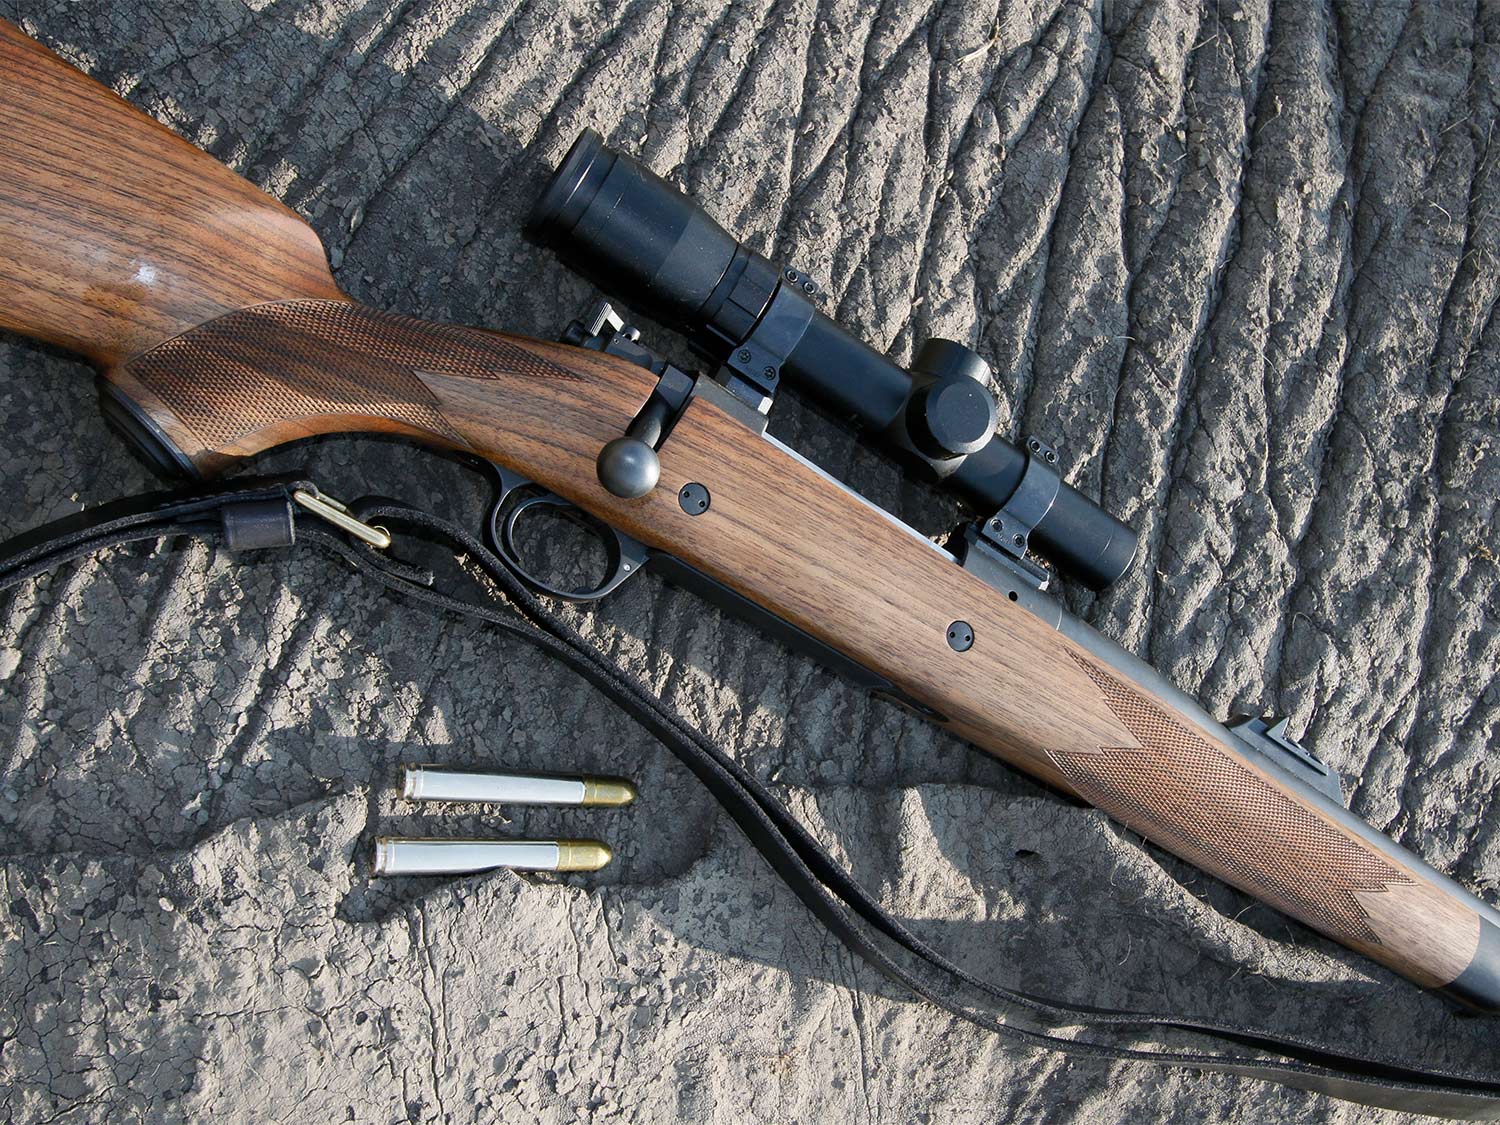 A Kimber rifle in .458 Winchester Magnum